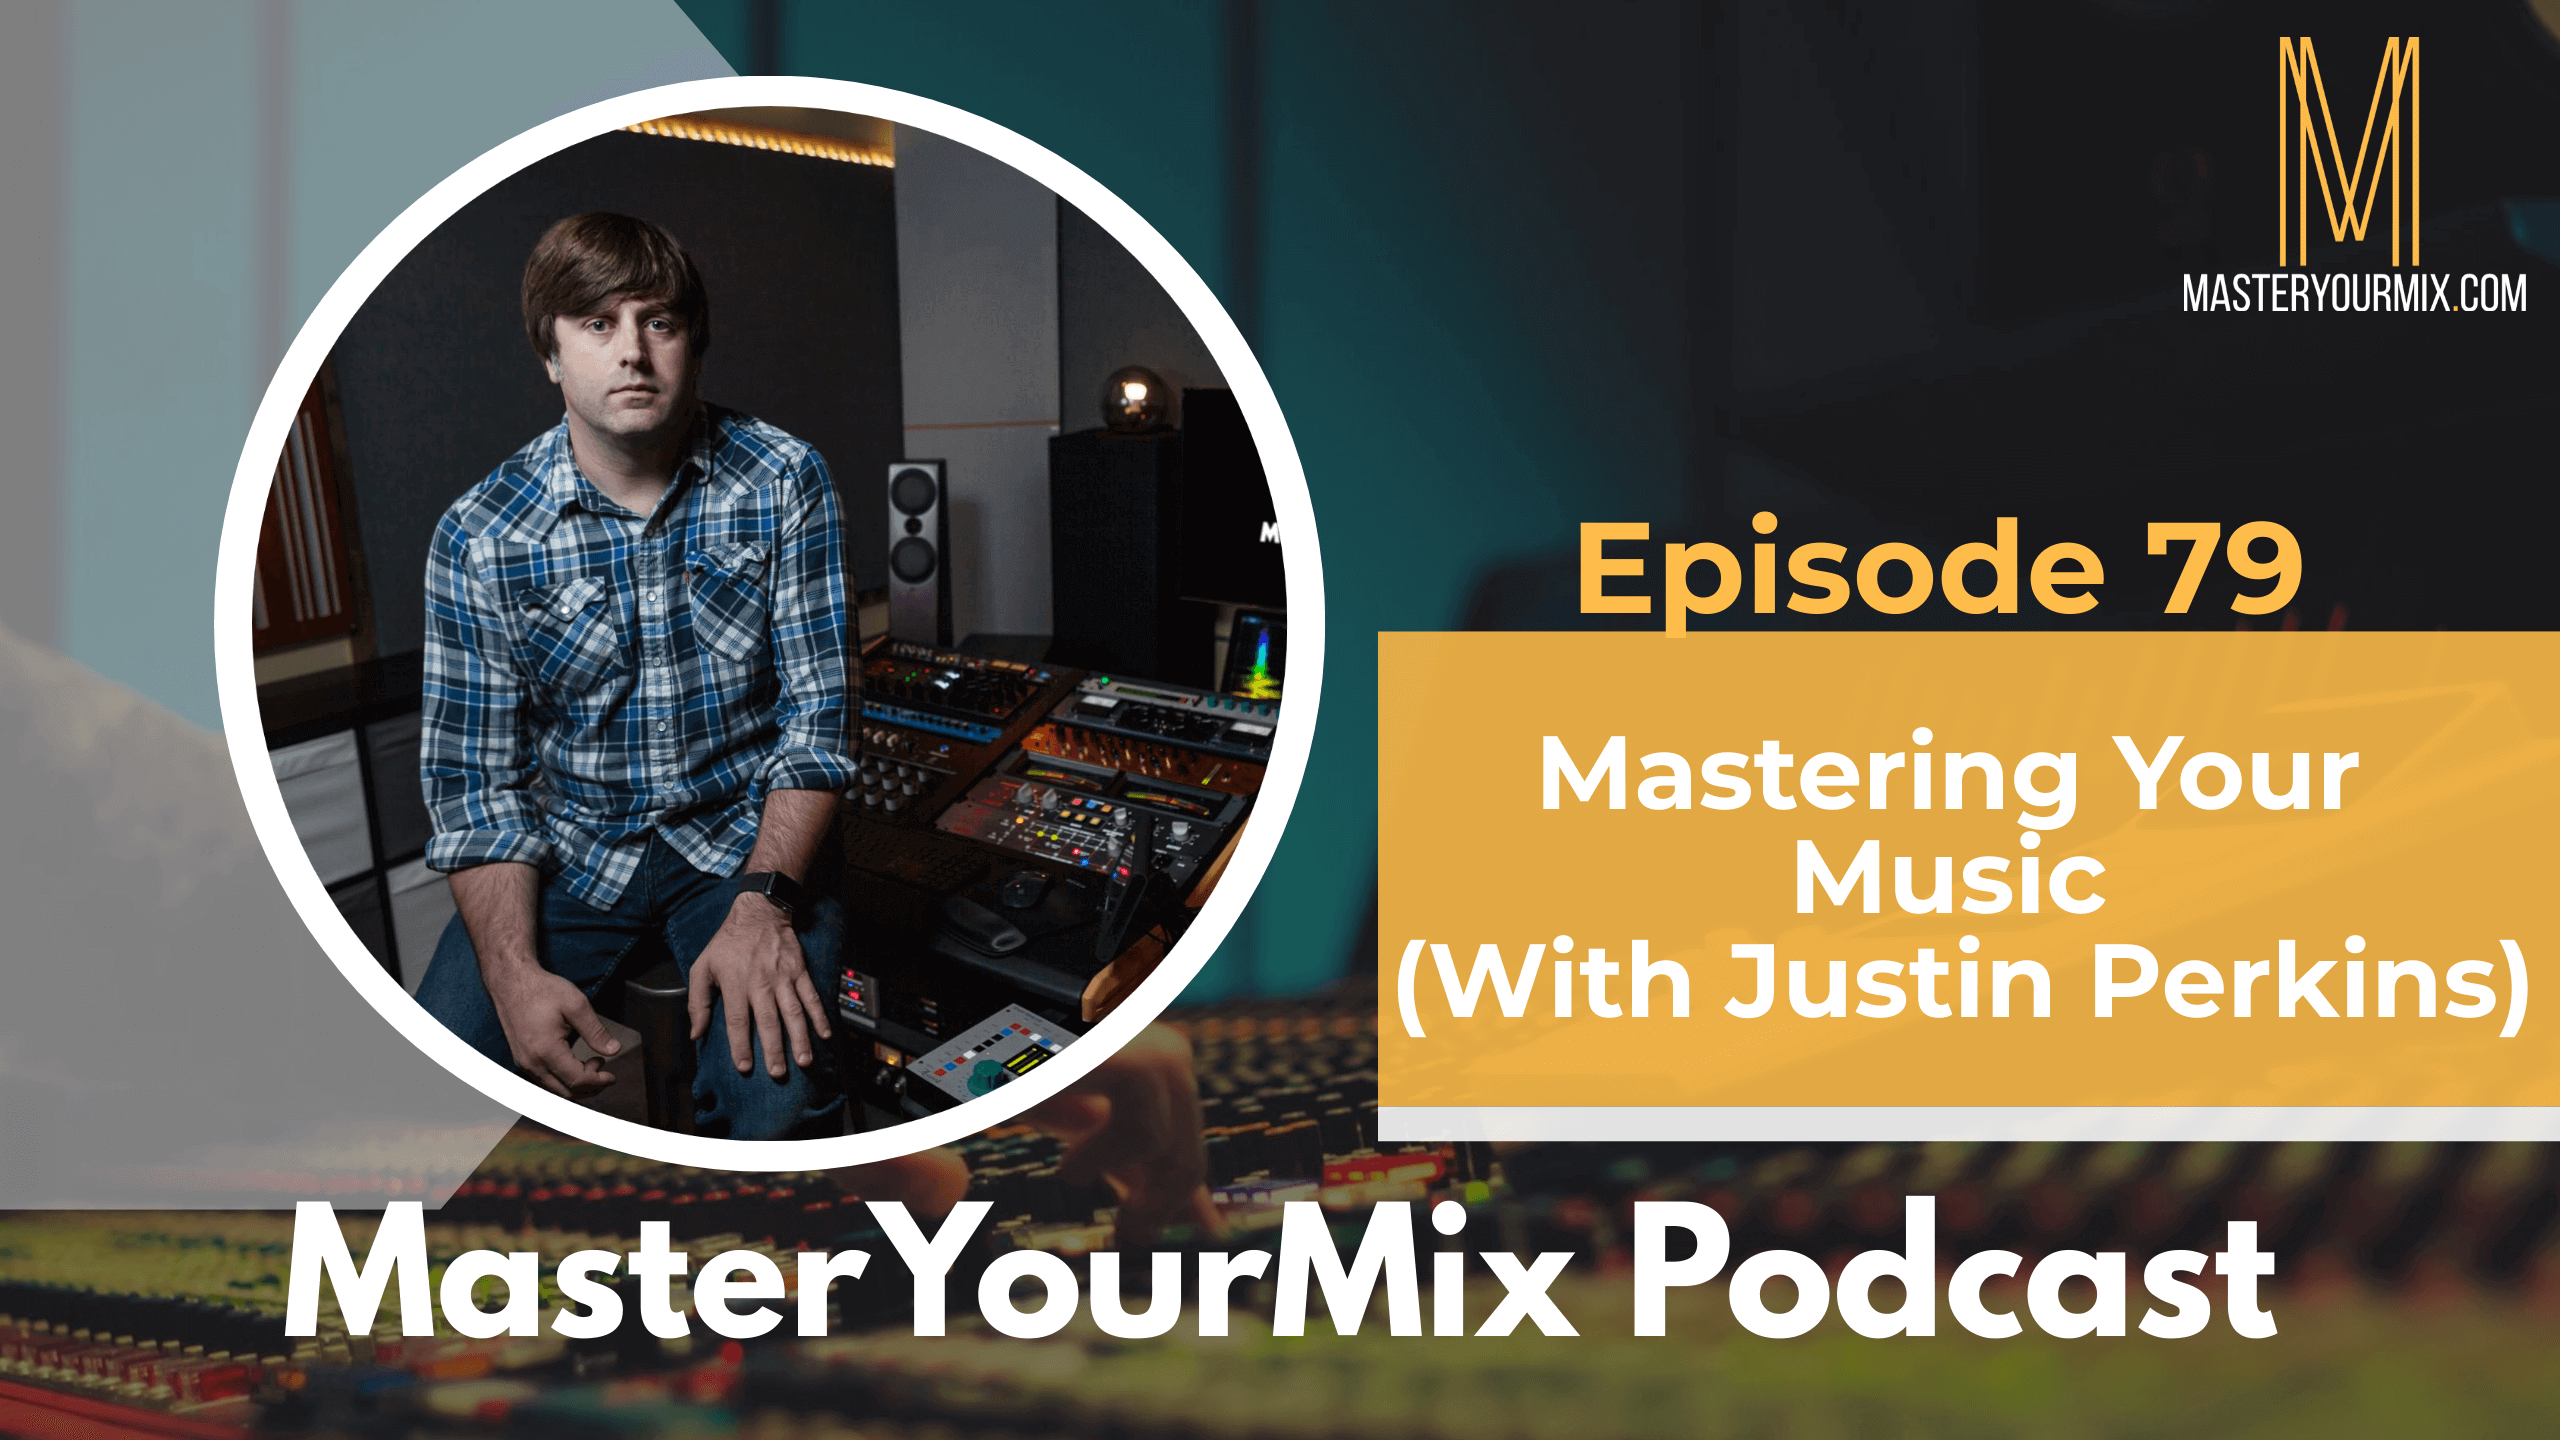 master your mix podcast, ep 79 justin perkins